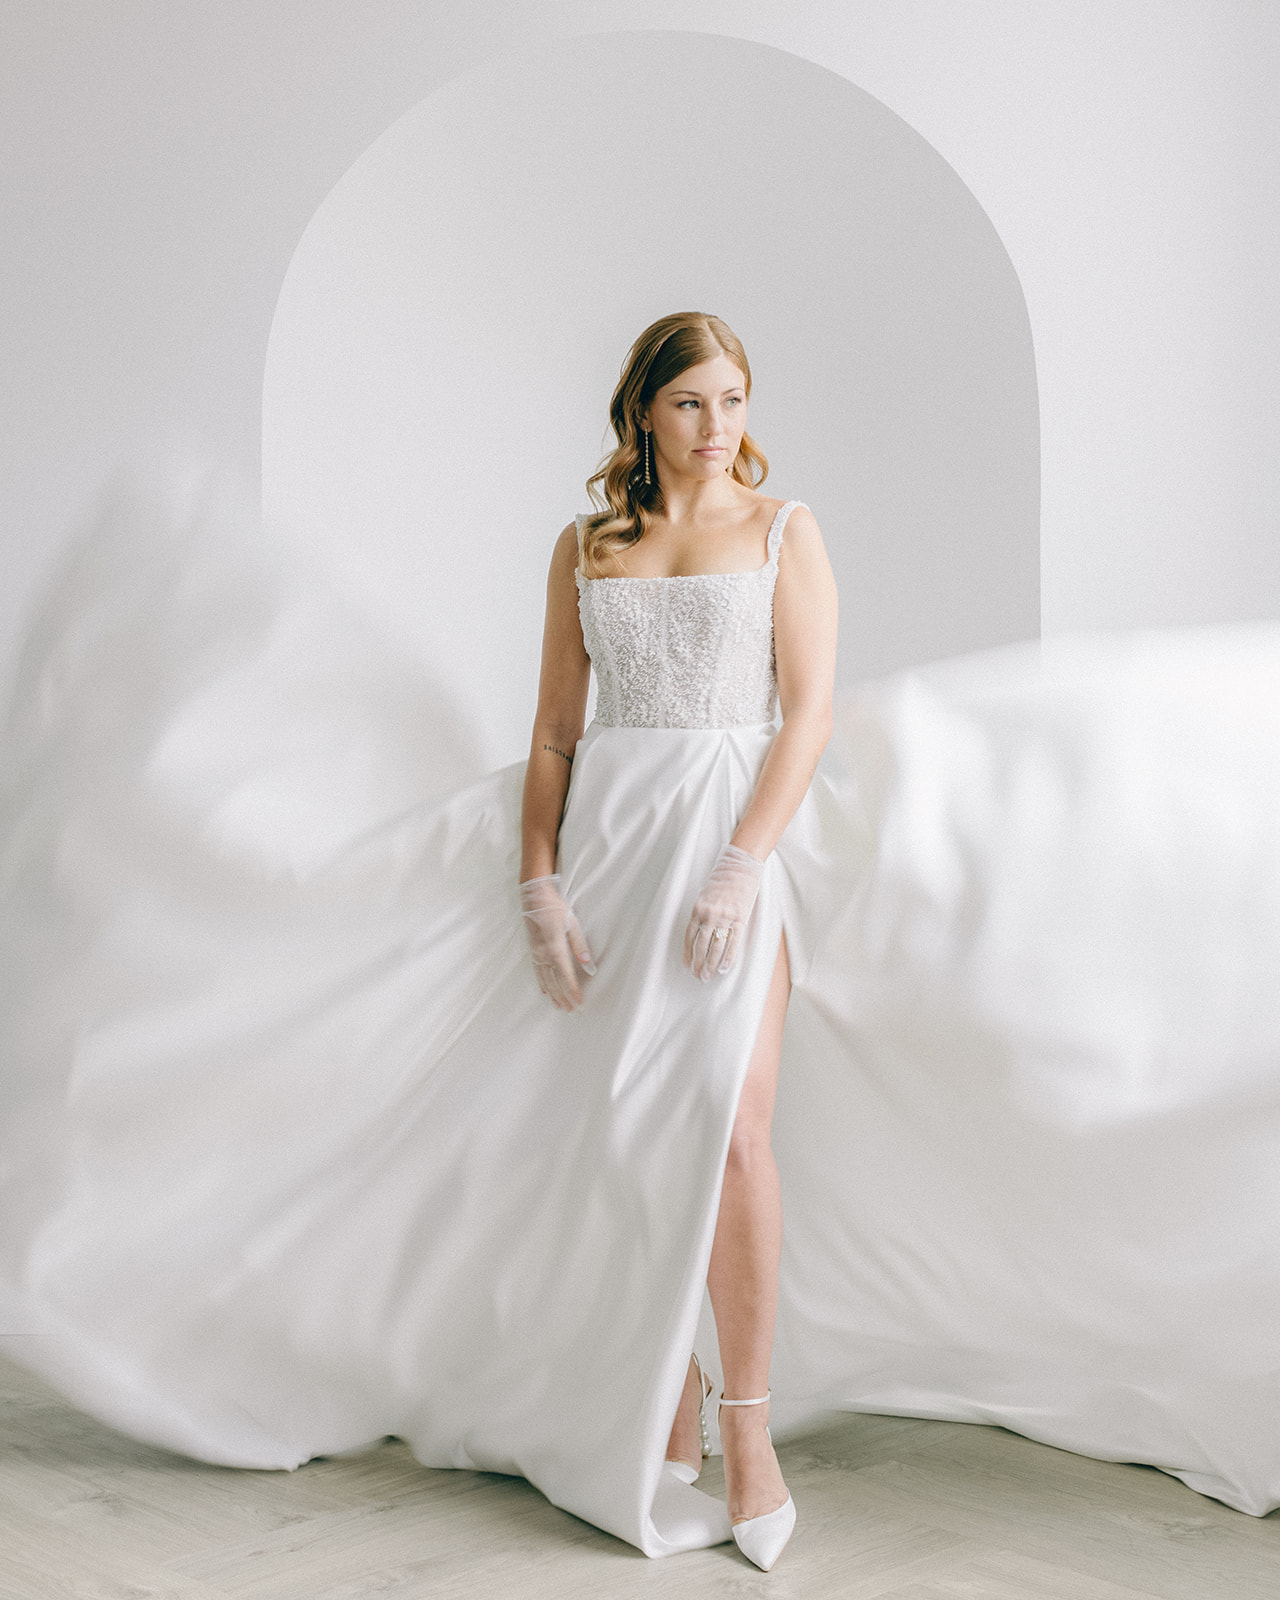 Bridal portrait with gown in motion